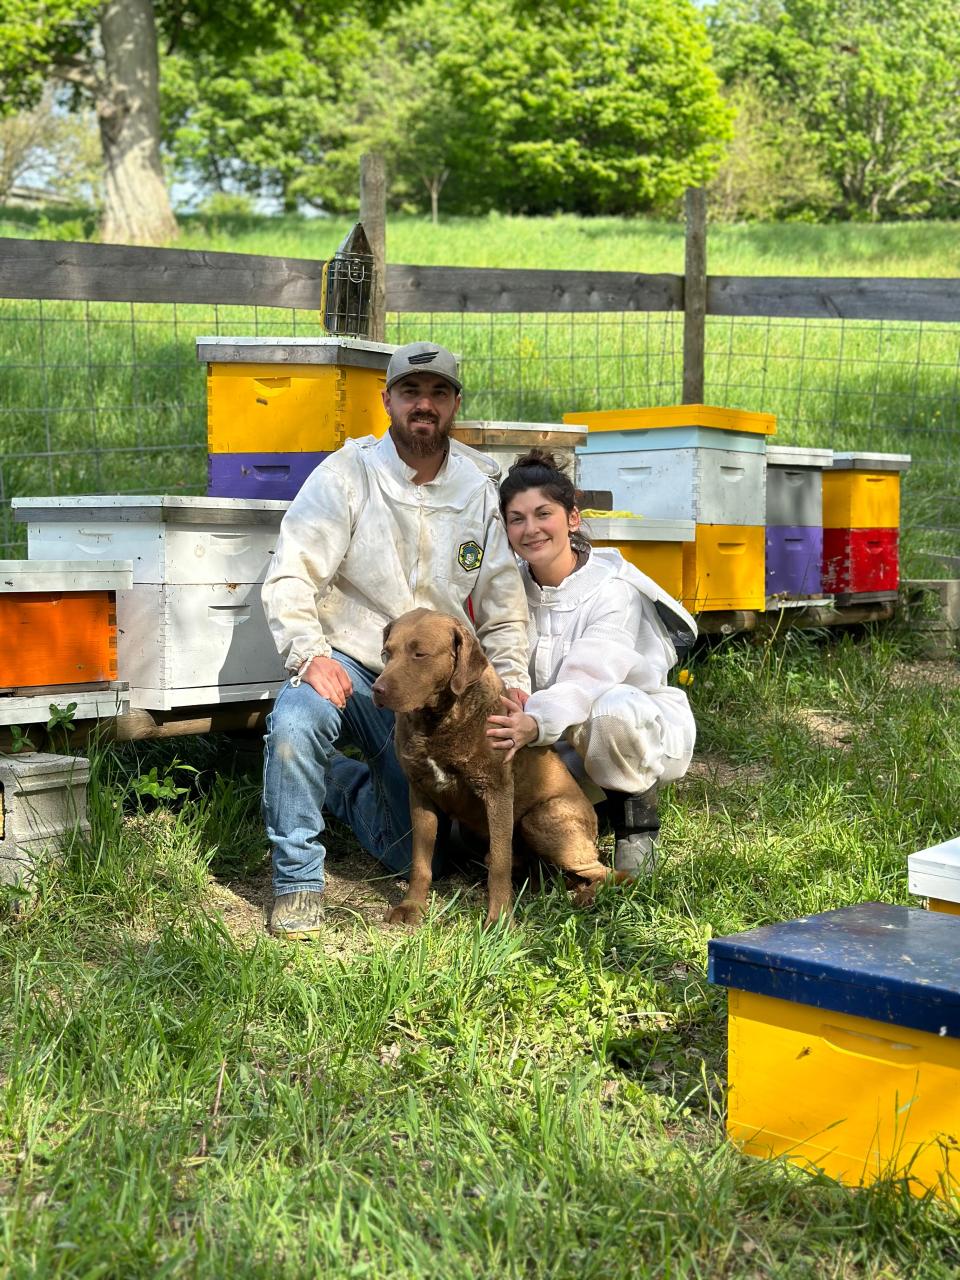 Chad and Brittany Edwards with their dog Koda in front of bee hives they are using to collect honey.